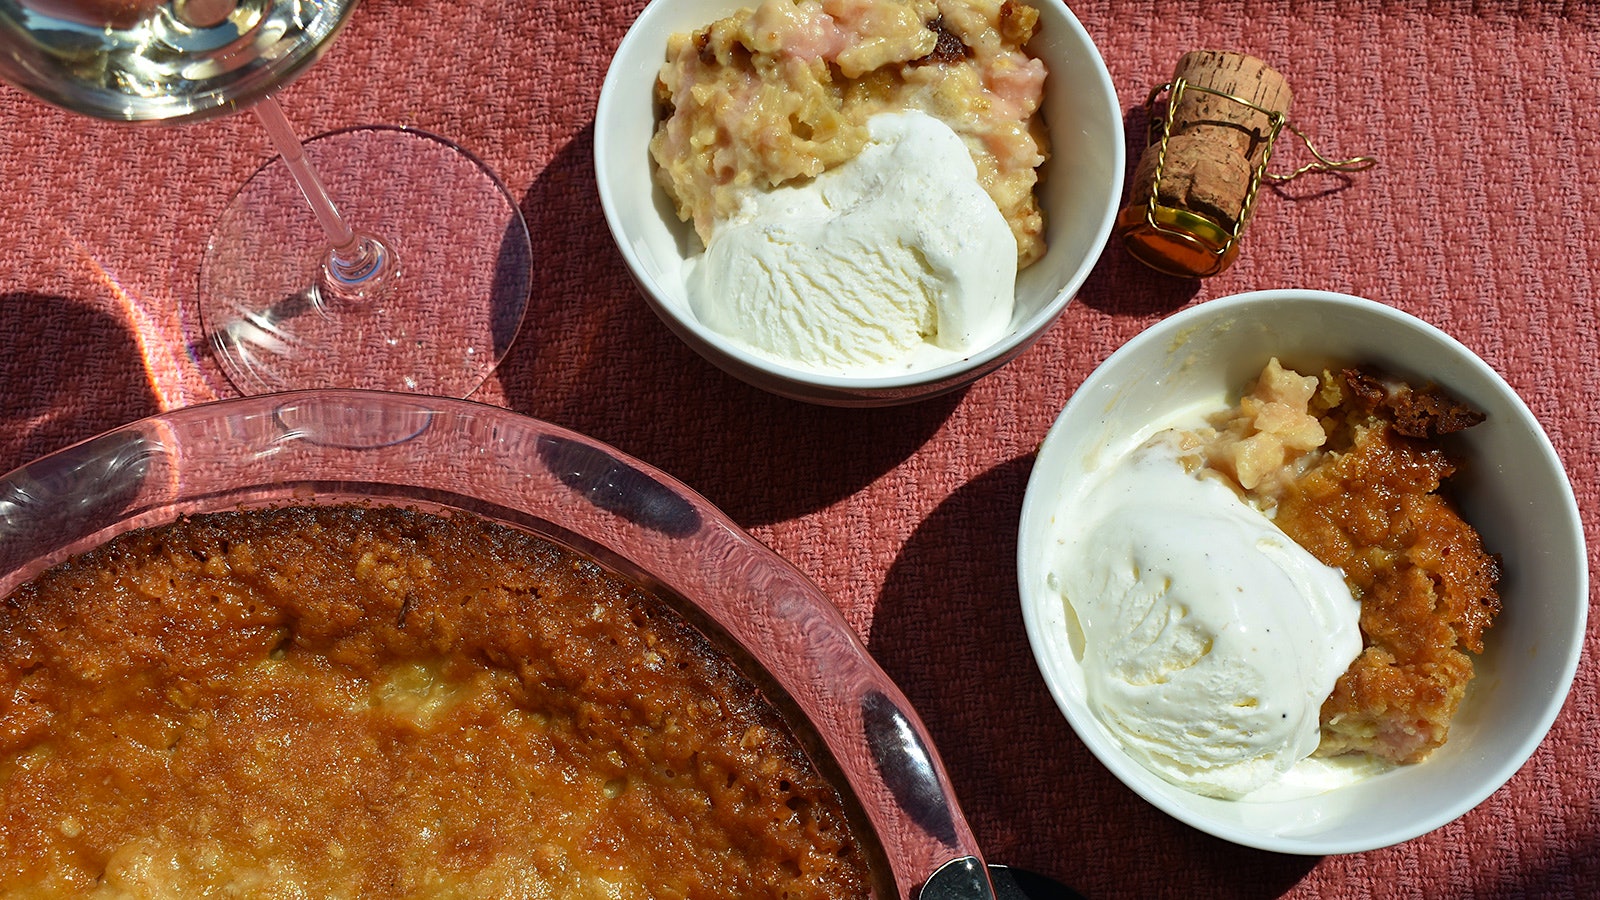  Rhubarb tart in a glass dish and bowls of tart and ice cream